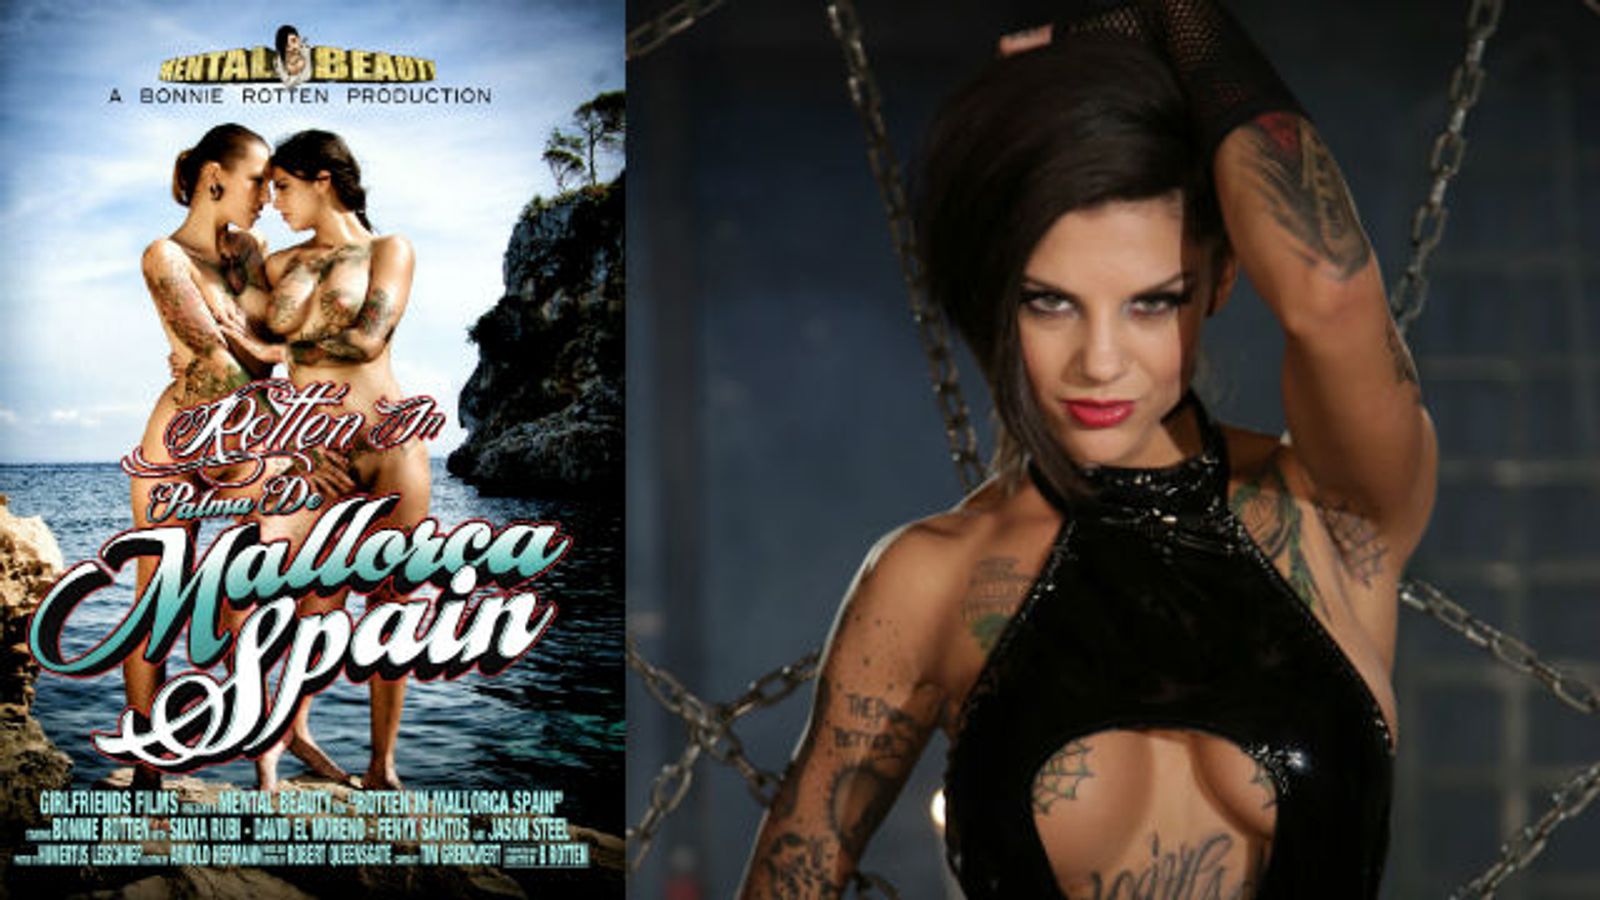 Bonnie Rotten’s Spanish Sinquisition Streets This Week